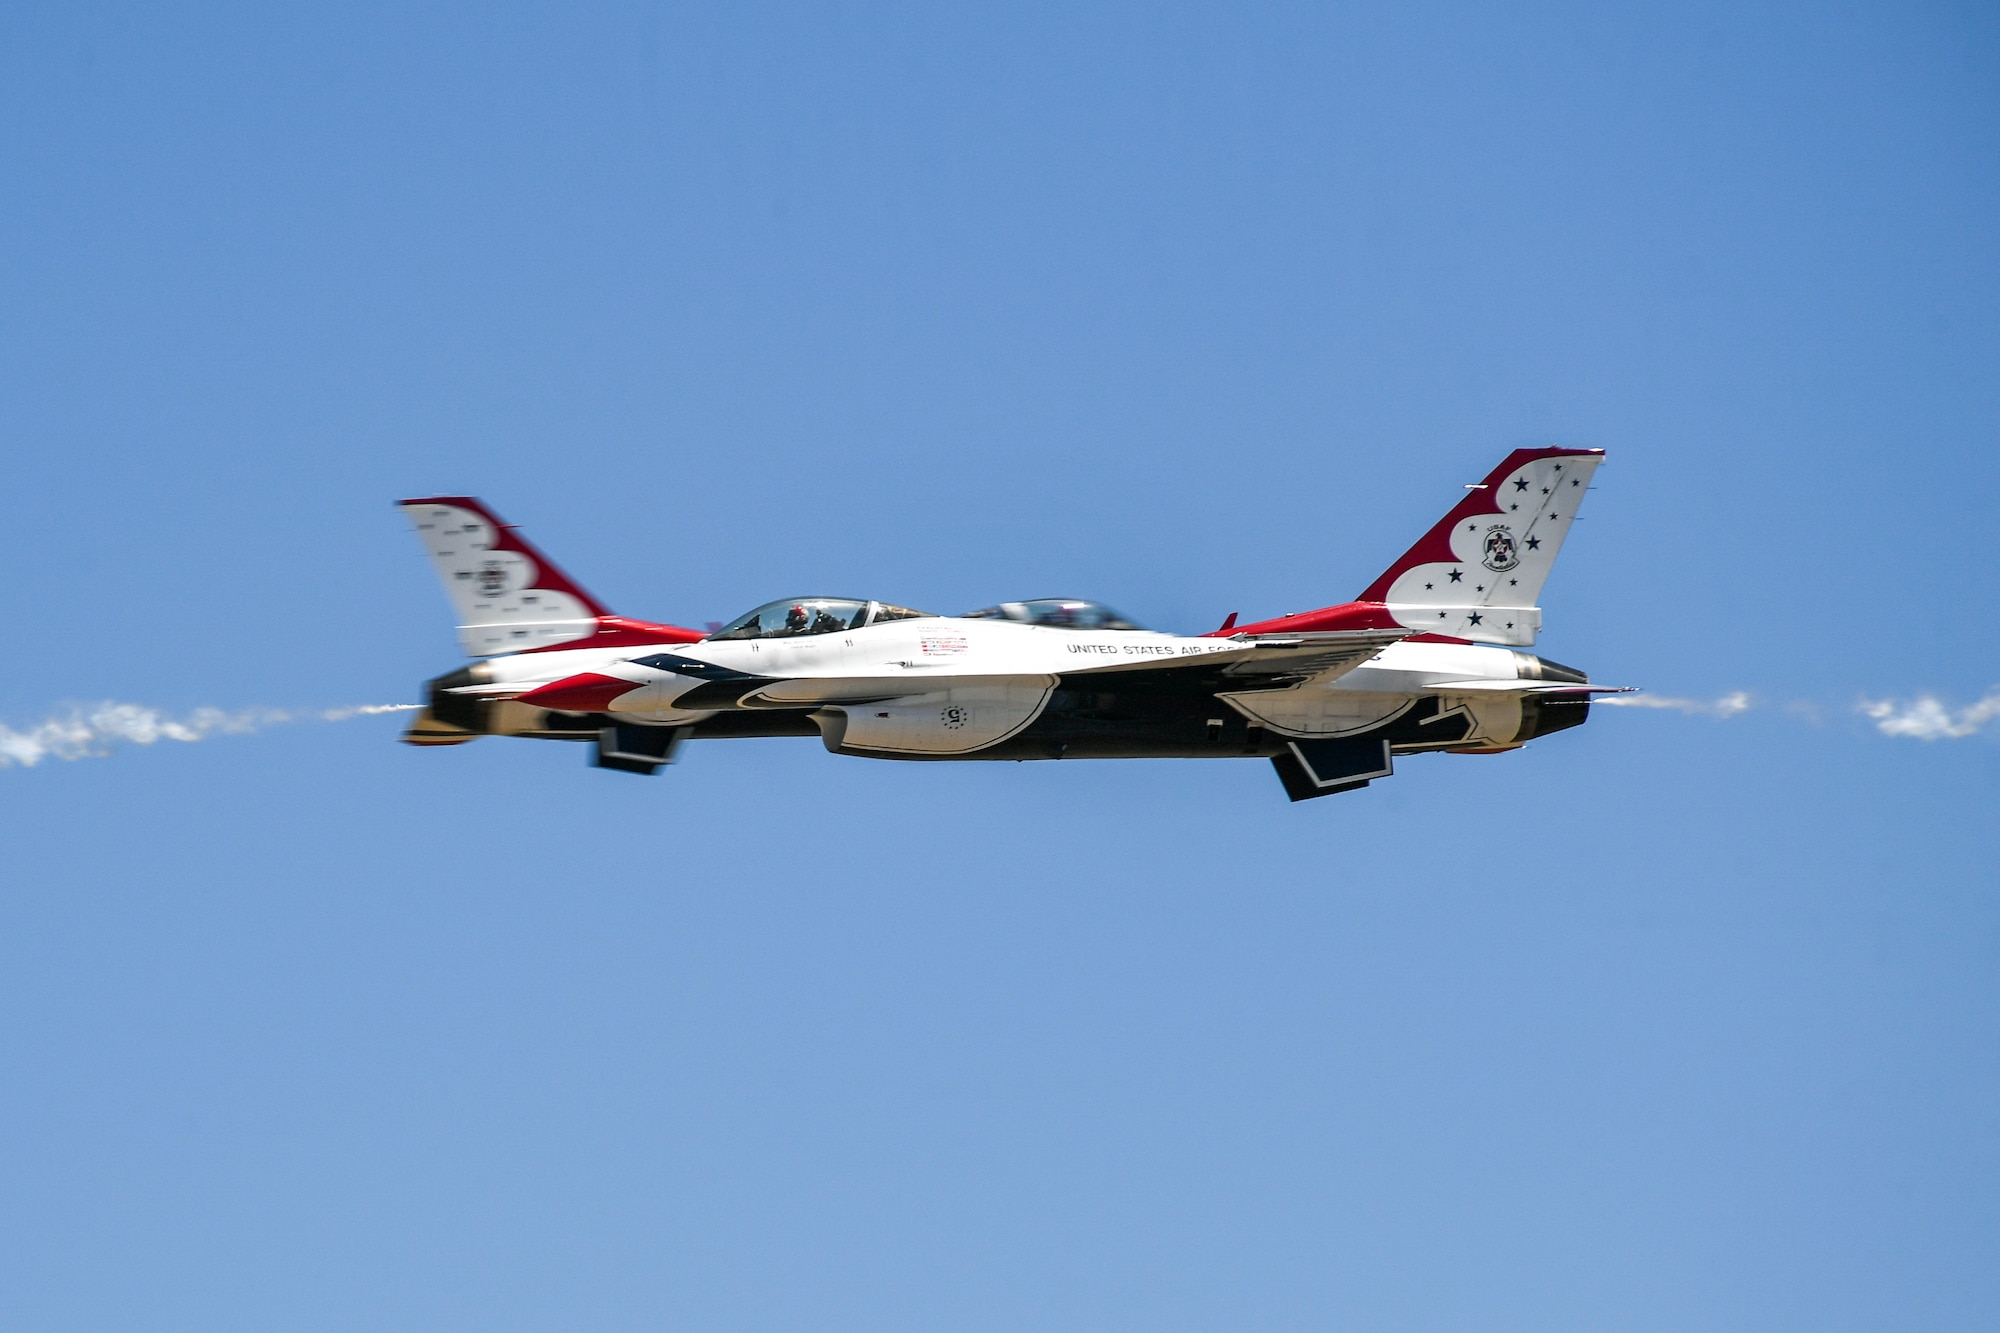 The U.S. Air Force Thunderbirds arrived June 24, 2022, at Hill Air Force Base for the Warriors Over the Wasatch Air and Space show happening June 25-26.